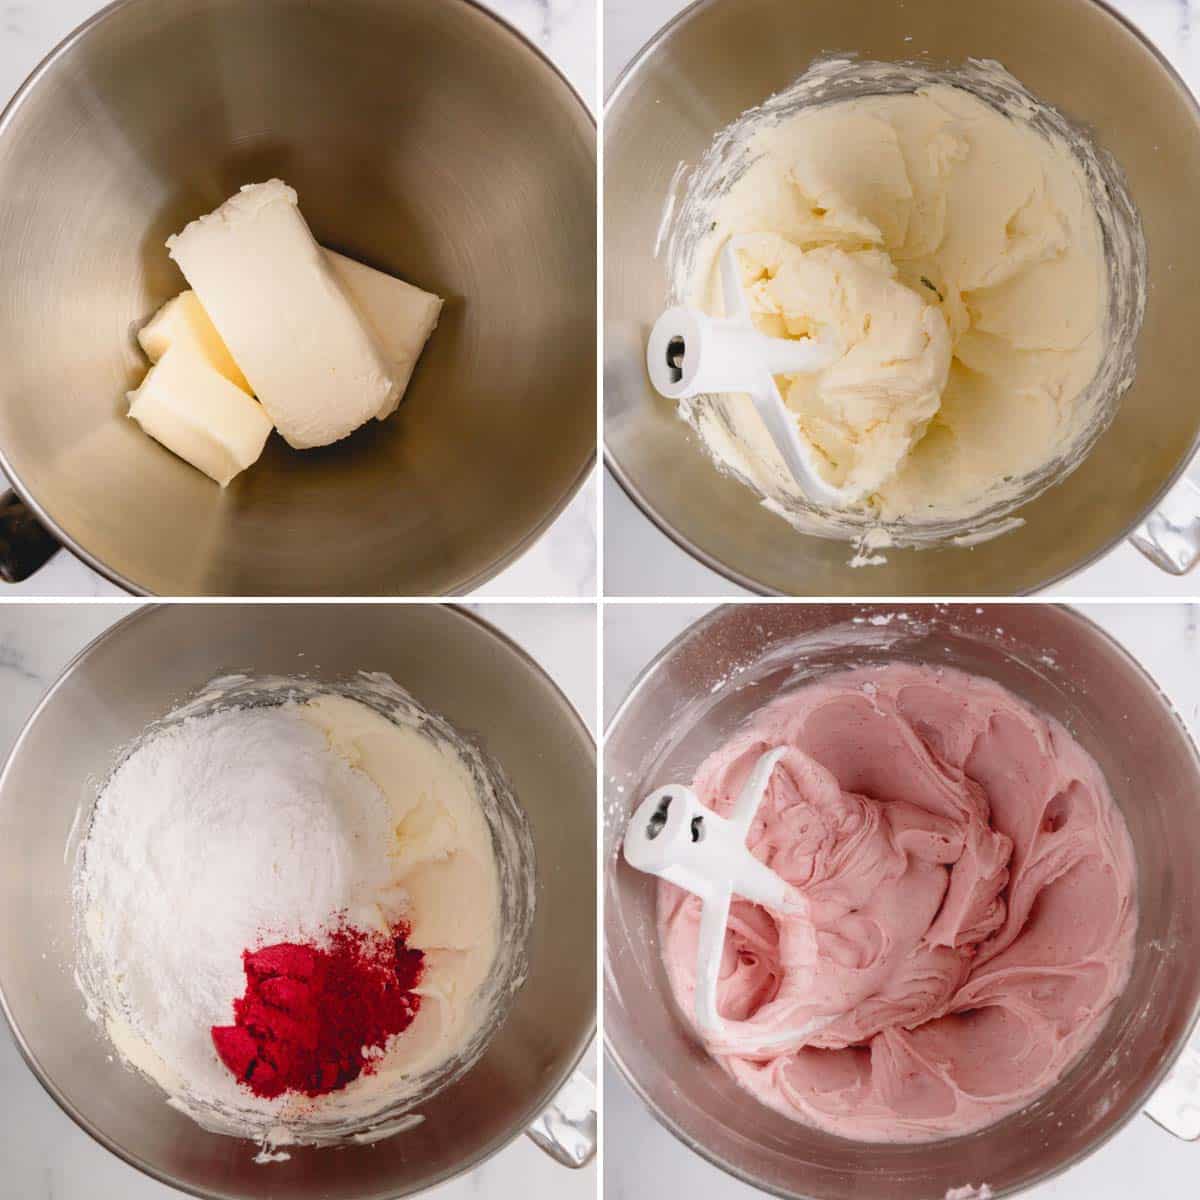 Four images showing the process of combining the ingredients for raspberry cream cheese frosting.